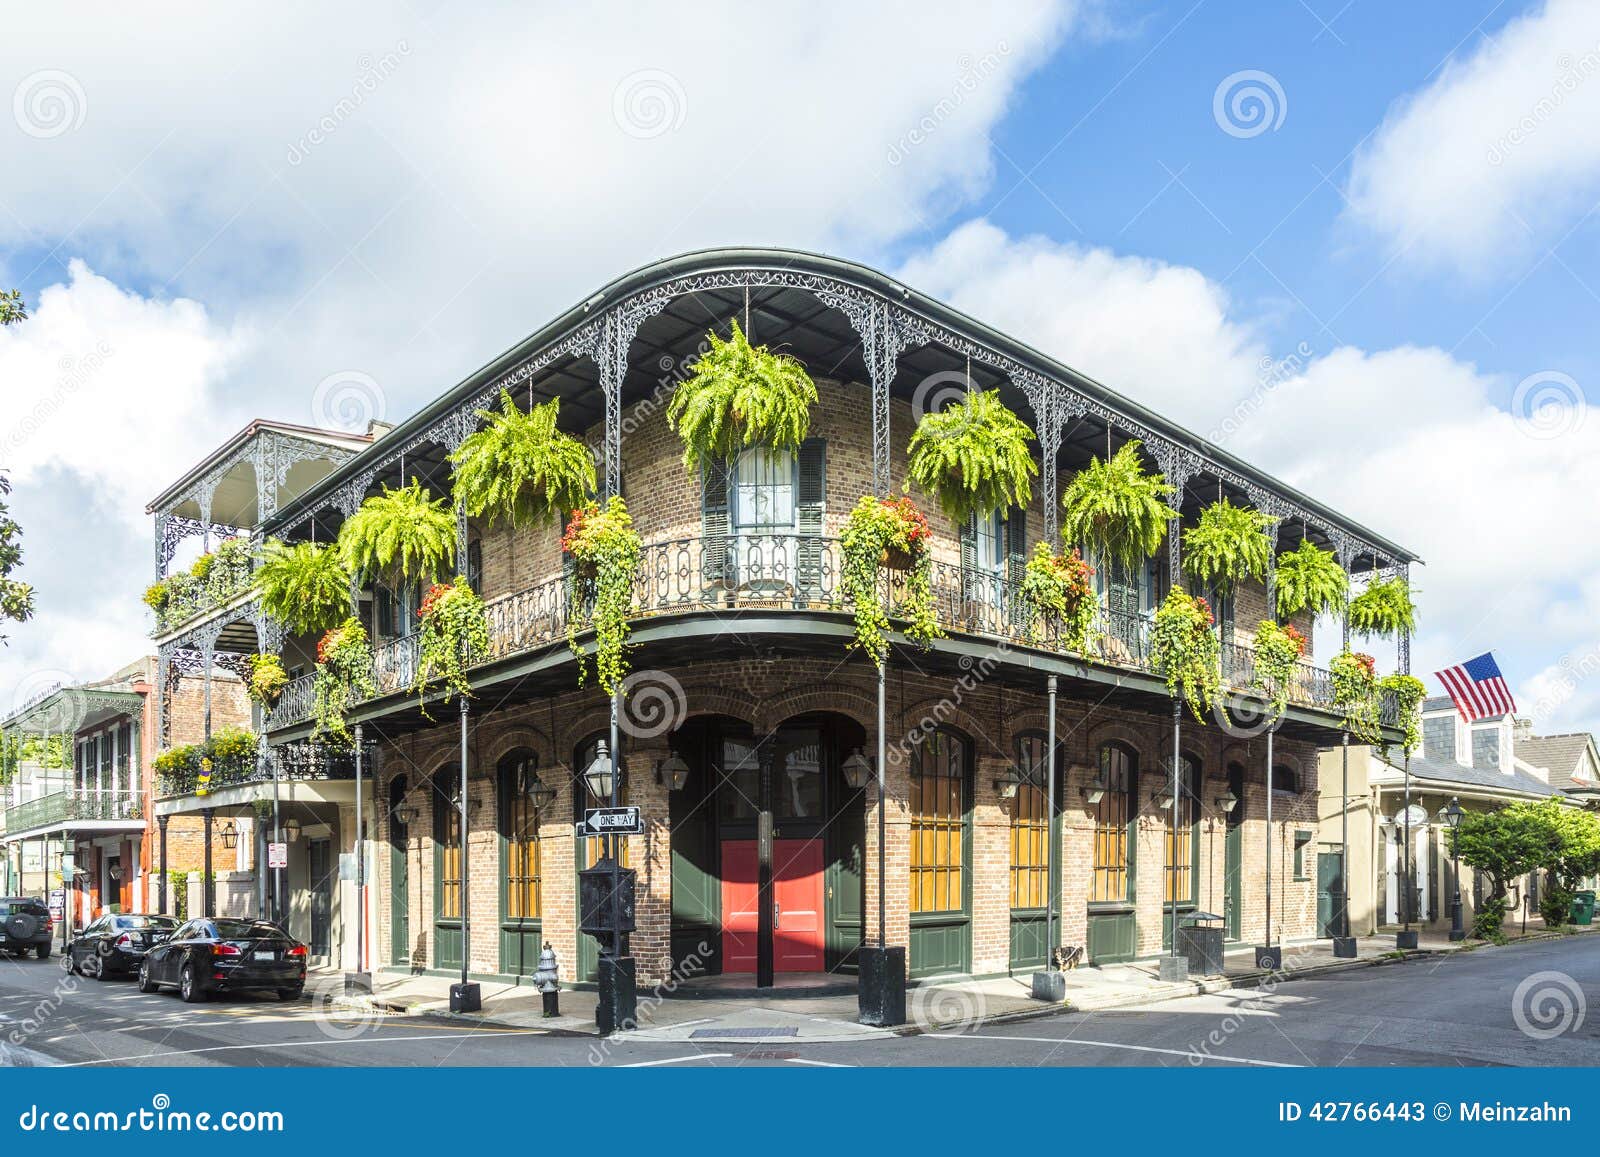 historic building in the french quarter